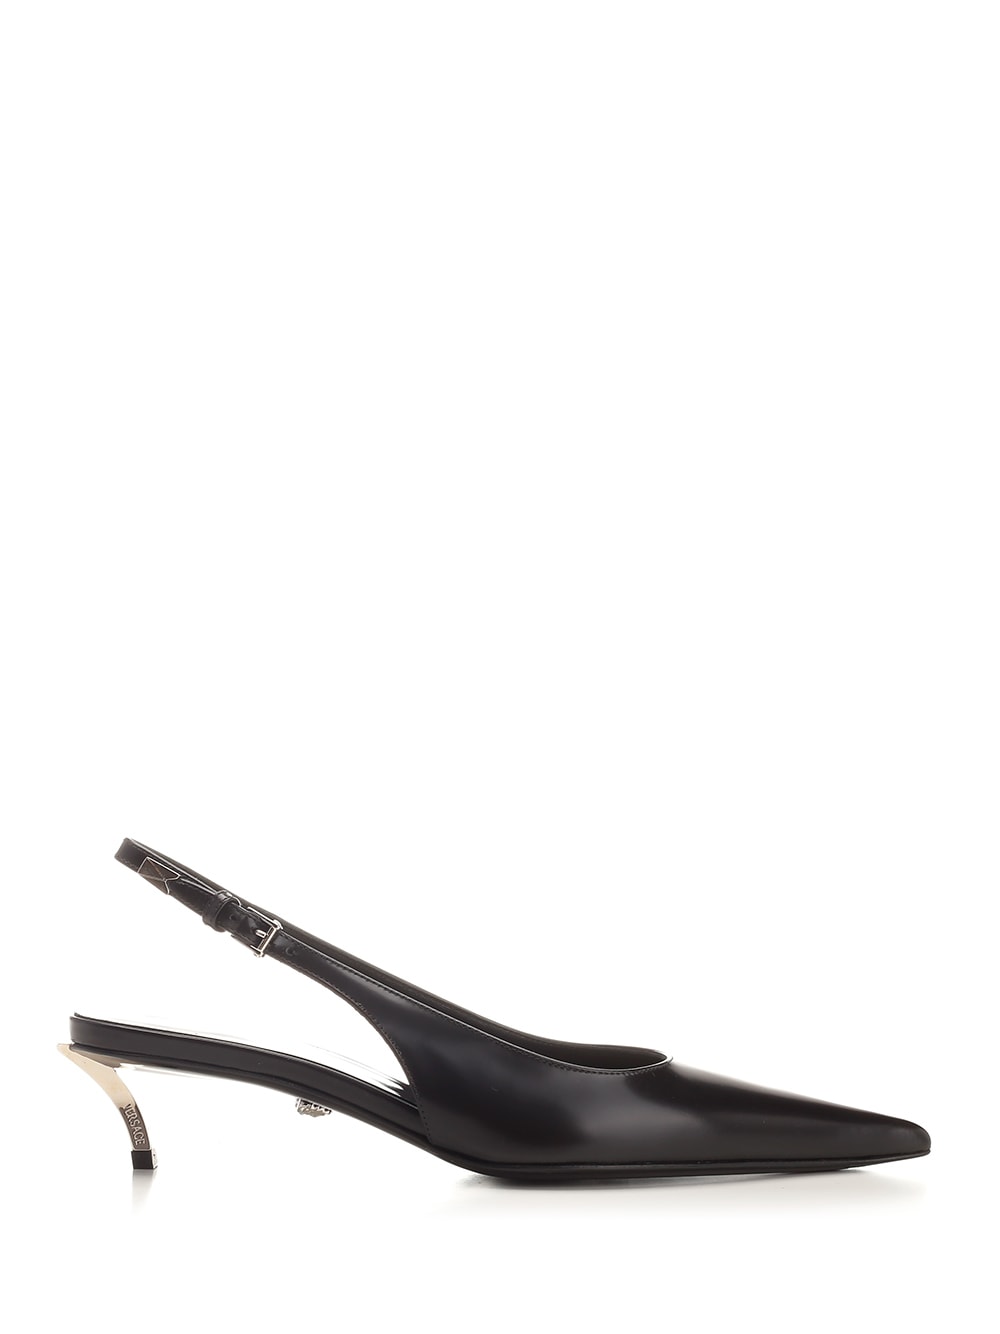 VERSACE PIN-POINT SLINGBACK PUMPS